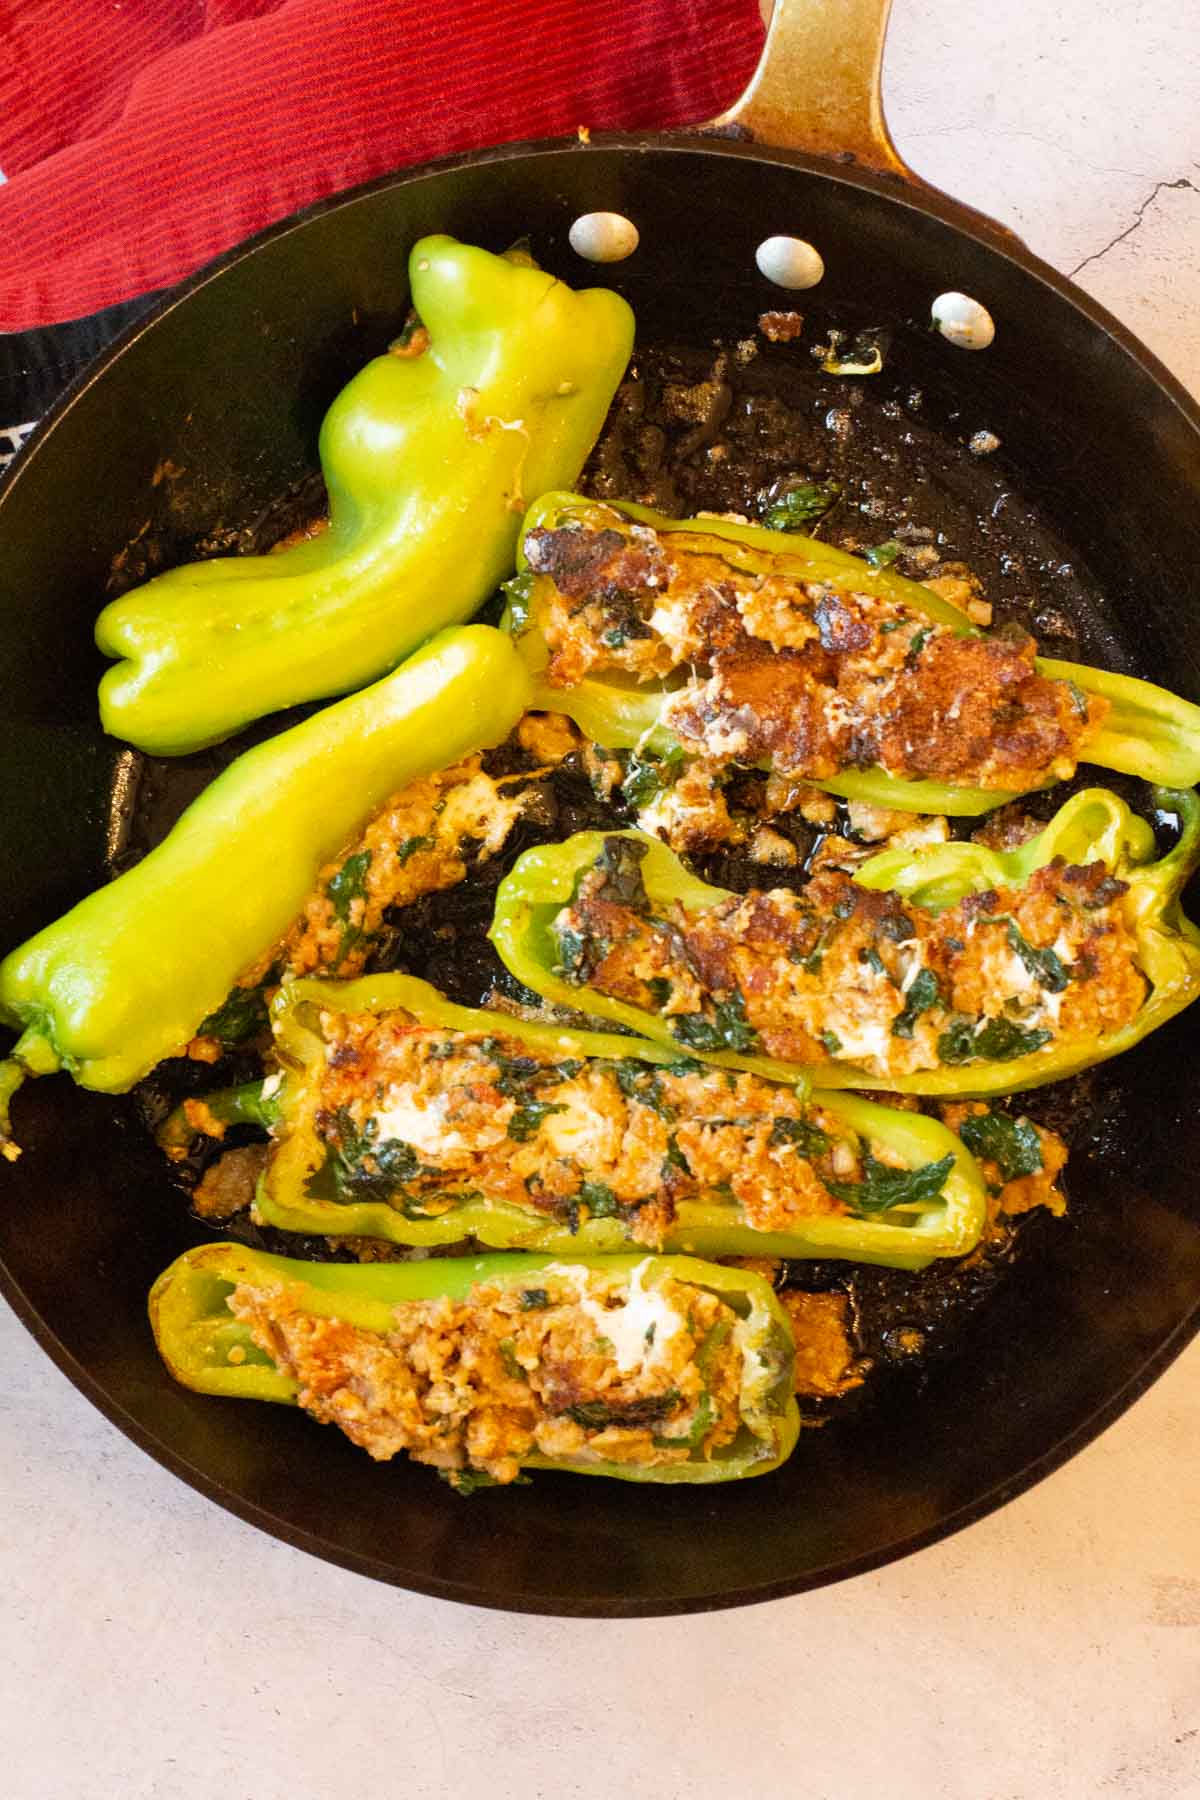 Frying Italian Peppers stuffed with Italian Sausage and Spinach.